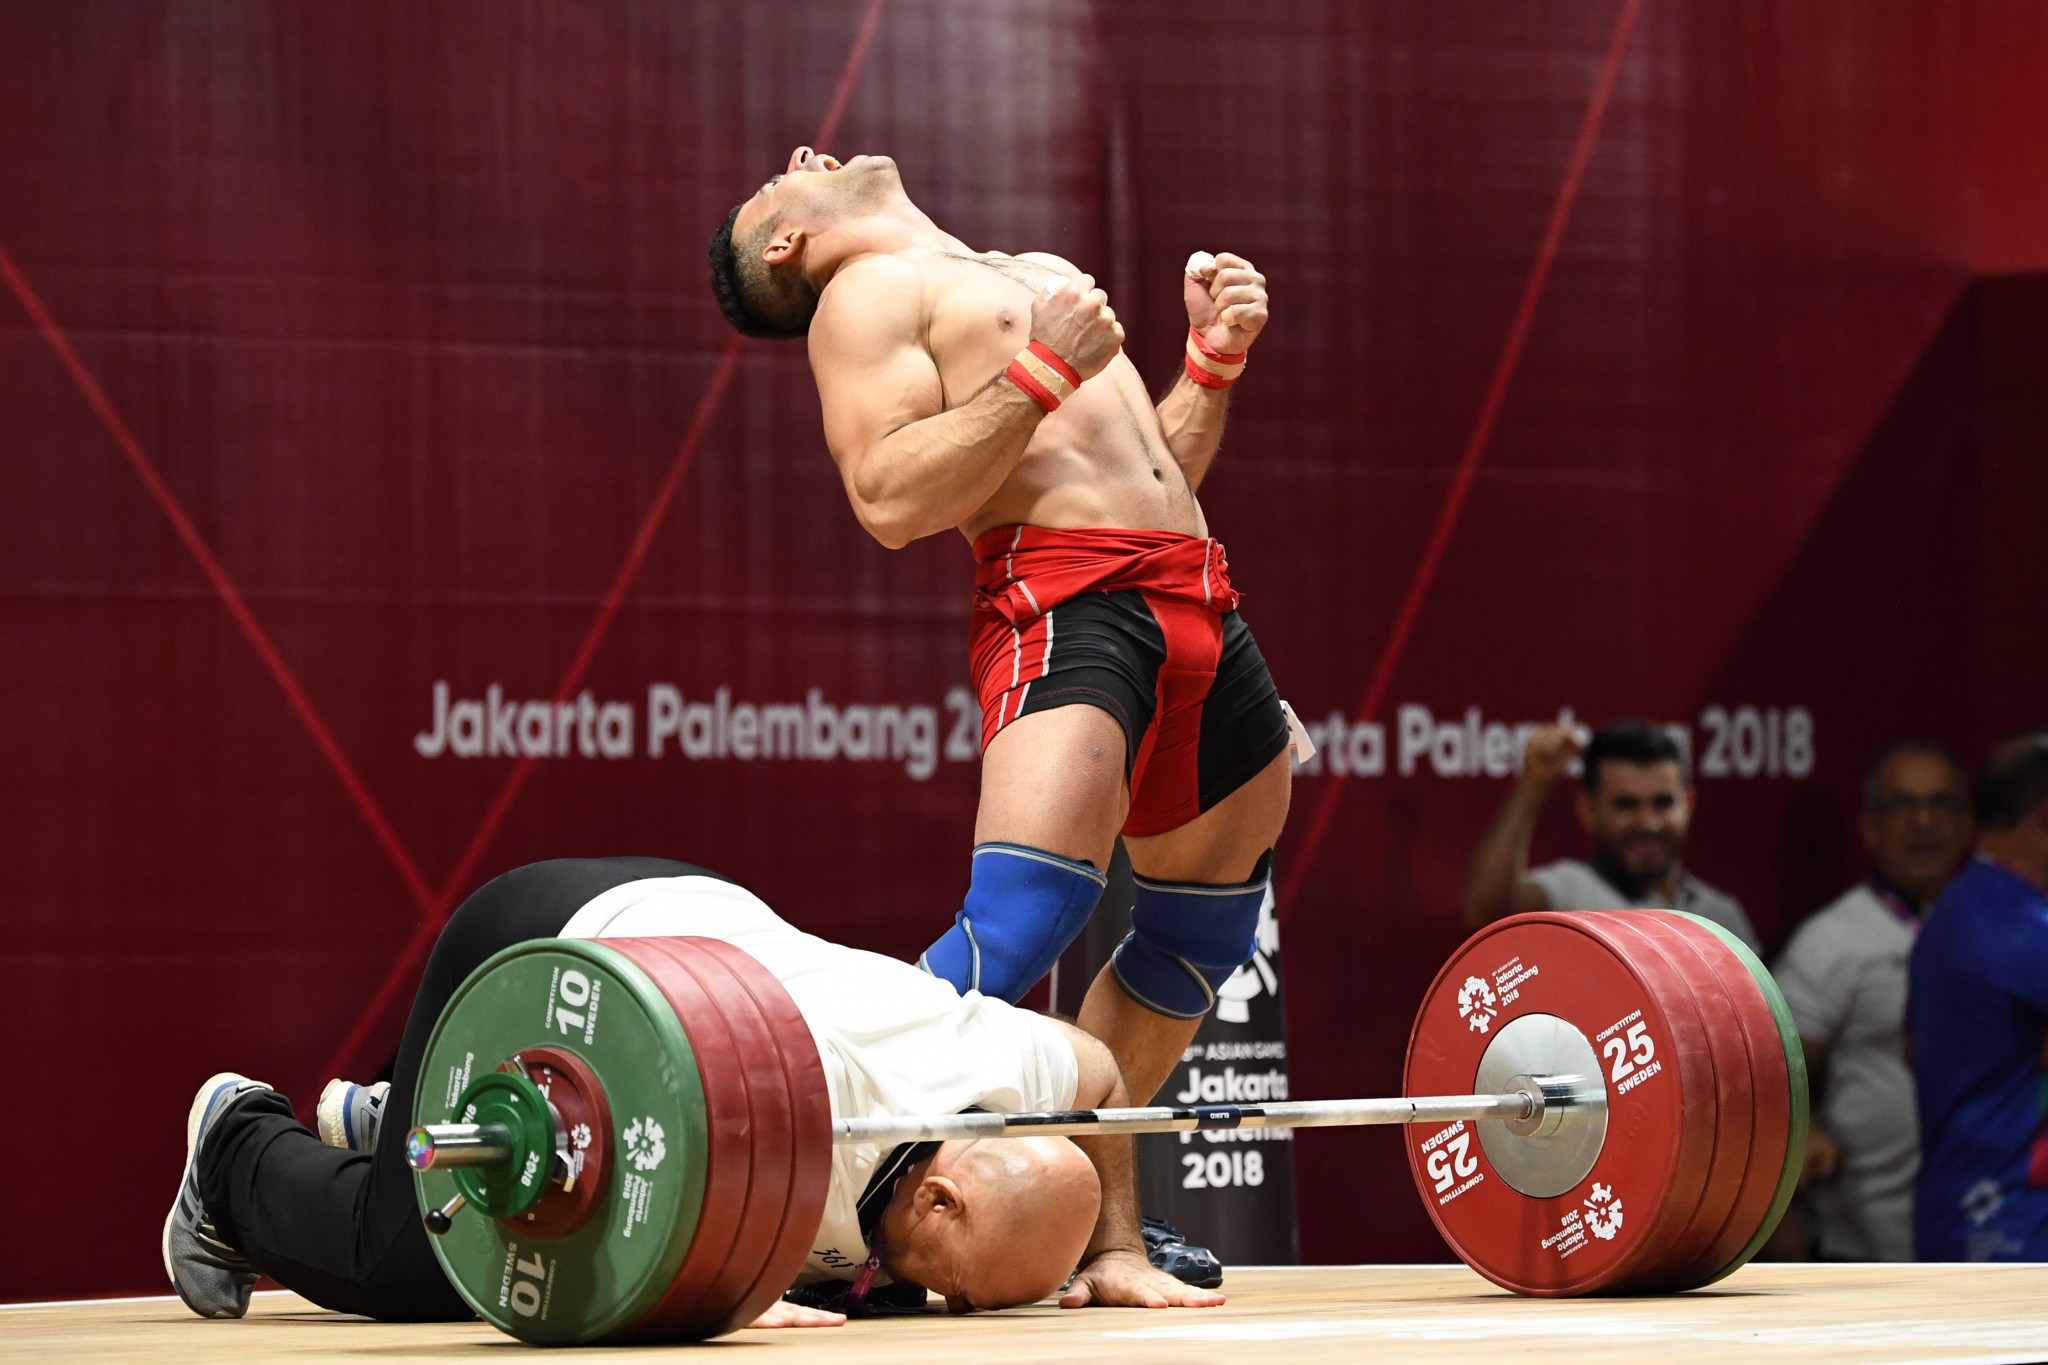 Safaa Rashid Mohmood Aljumaili came out on top in the men's 85 kilograms weightlifting event to secure Iraq's first gold medal of these Games ©Getty Images